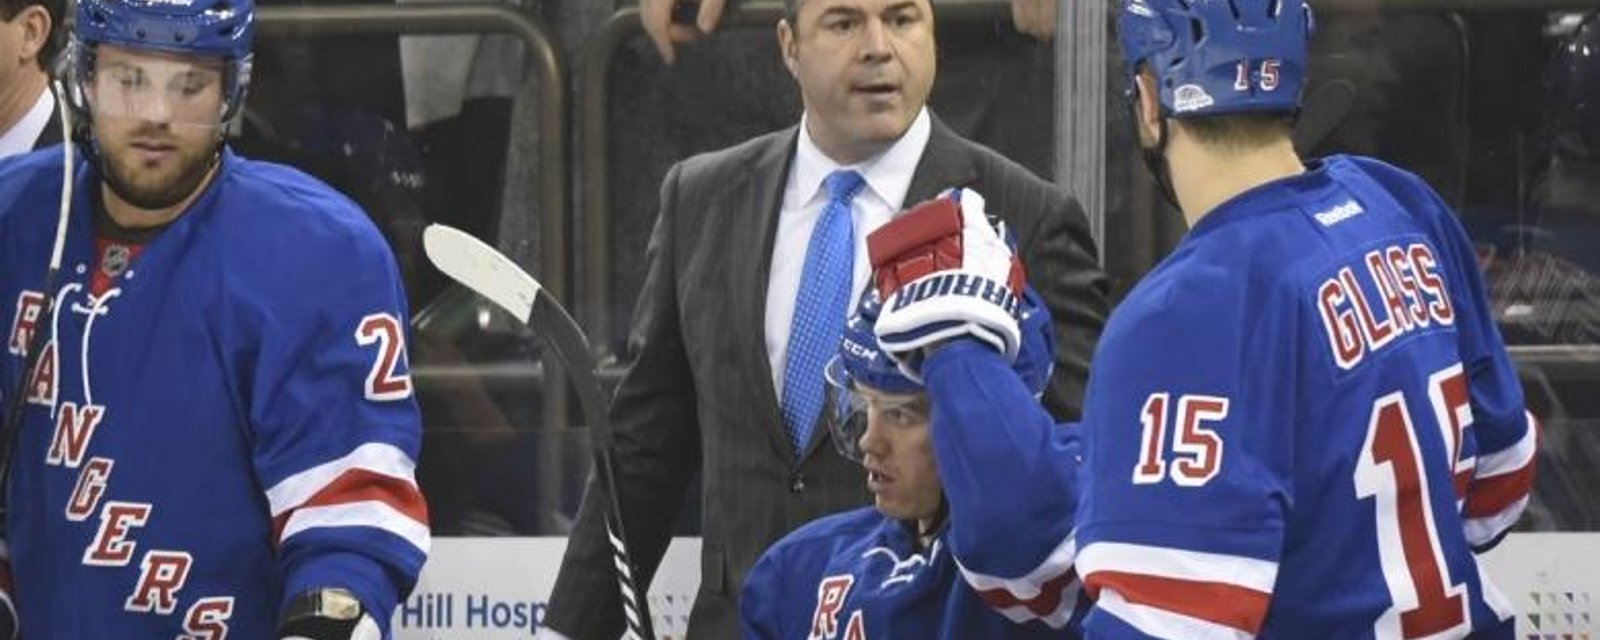 Latest rumors on the Rangers coaching situation.